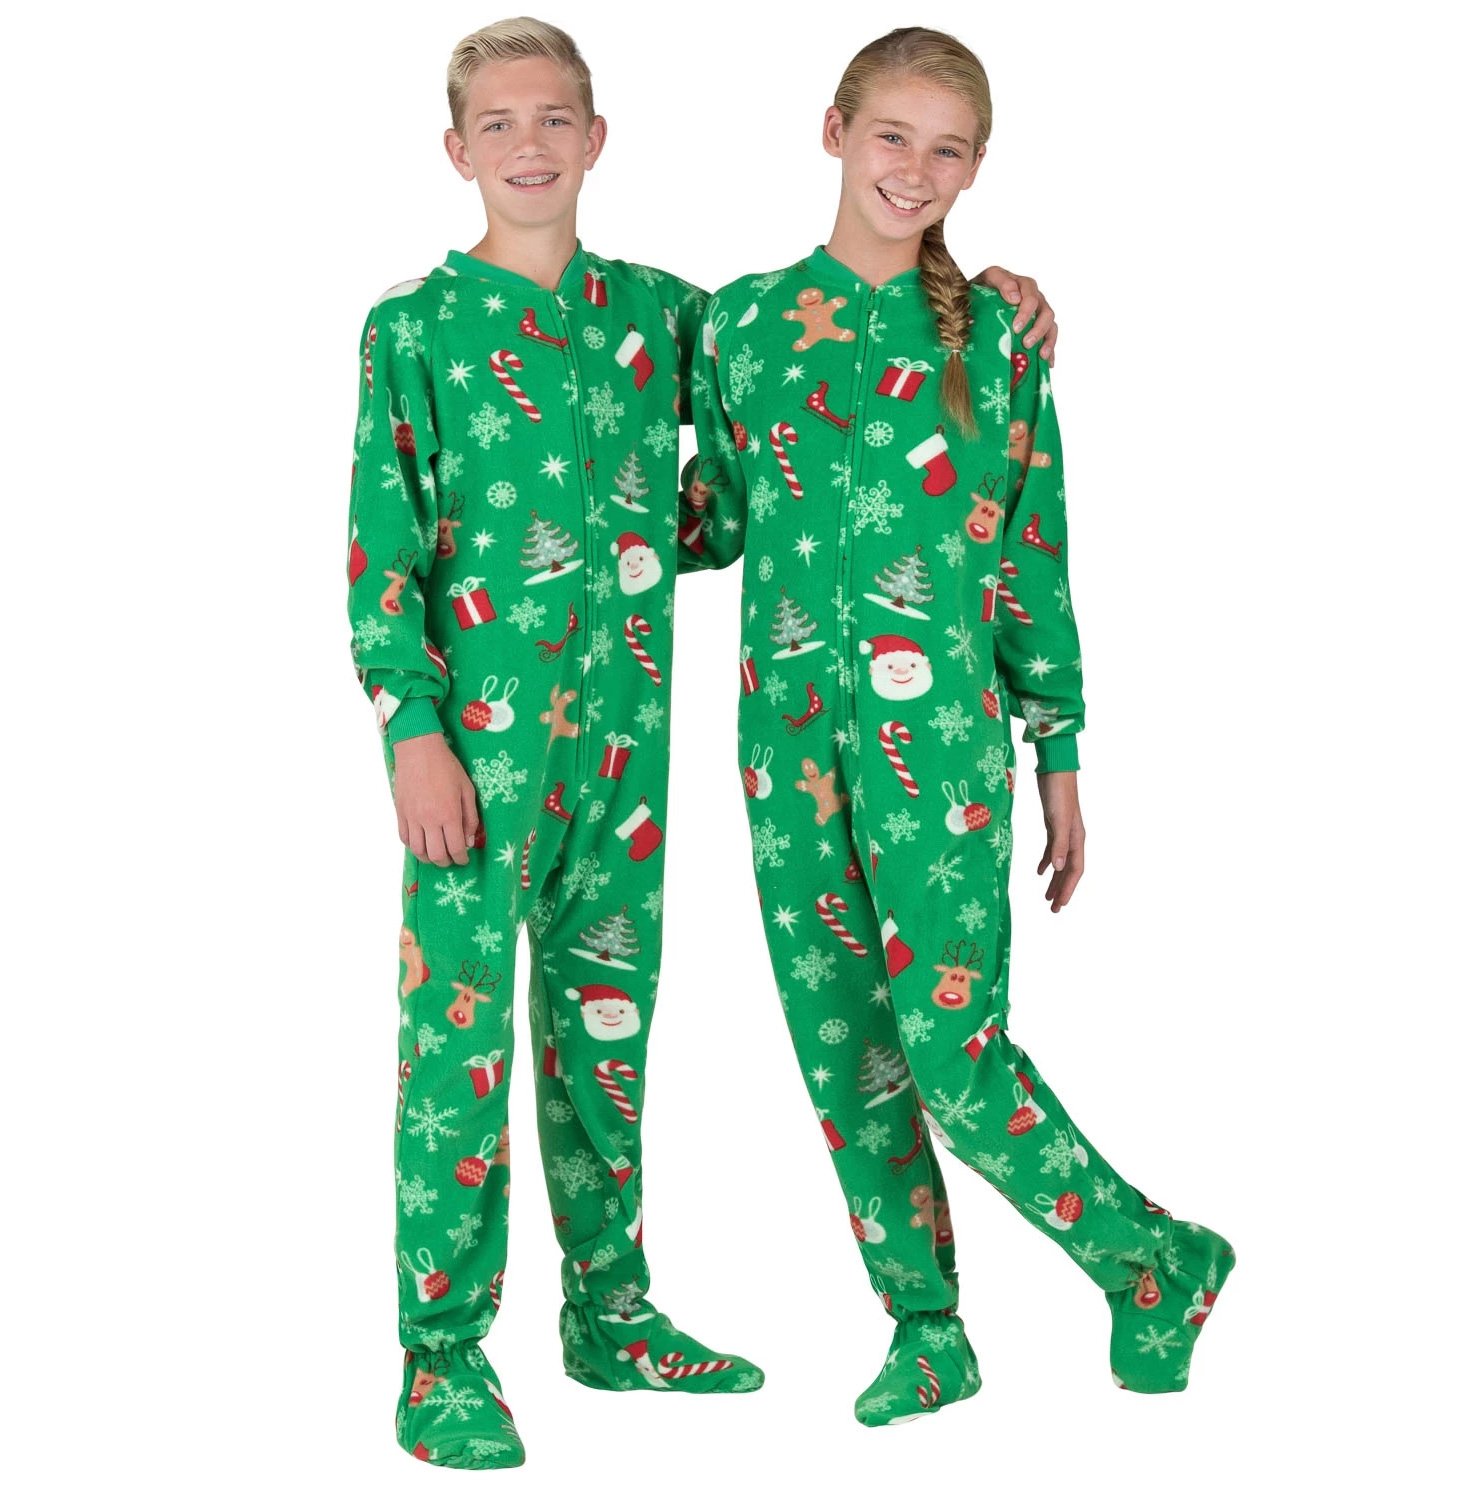 Footed Pajamas - Family Matching Green Christmas One Pieces for Boys, Girls, Men, Women and Pets - Pet - XLarge (Fits Up to 75 lbs) - image 4 of 7